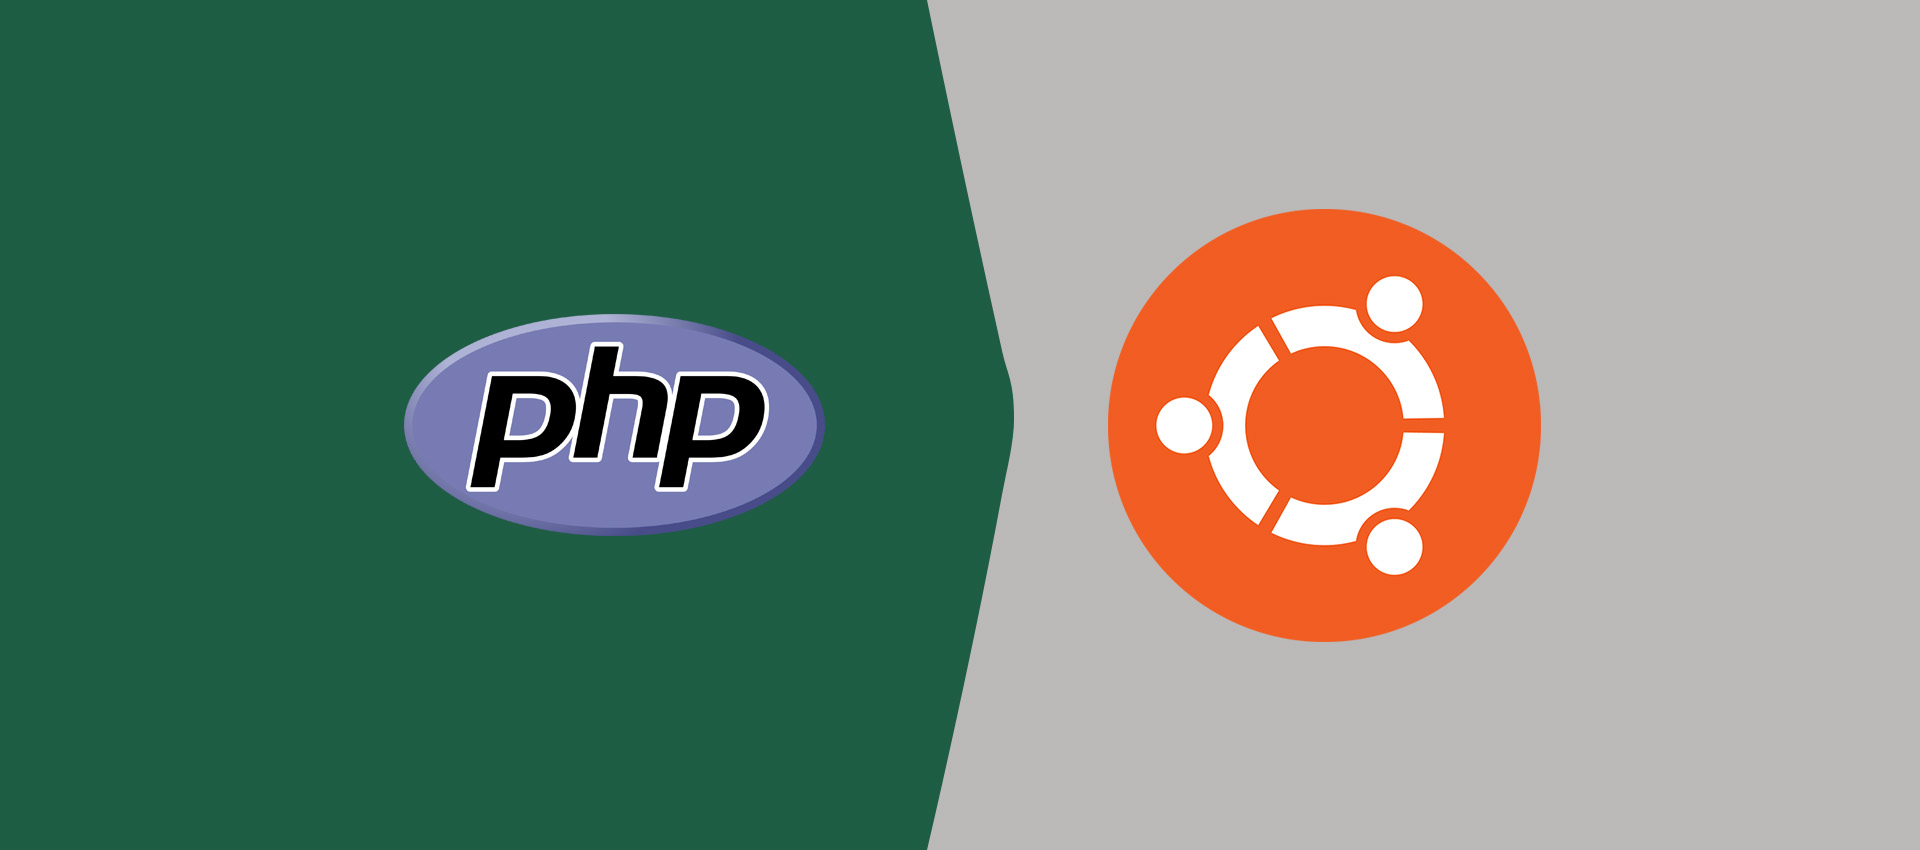 How To Install PHP 8 From Source On Ubuntu 20.04 LTS